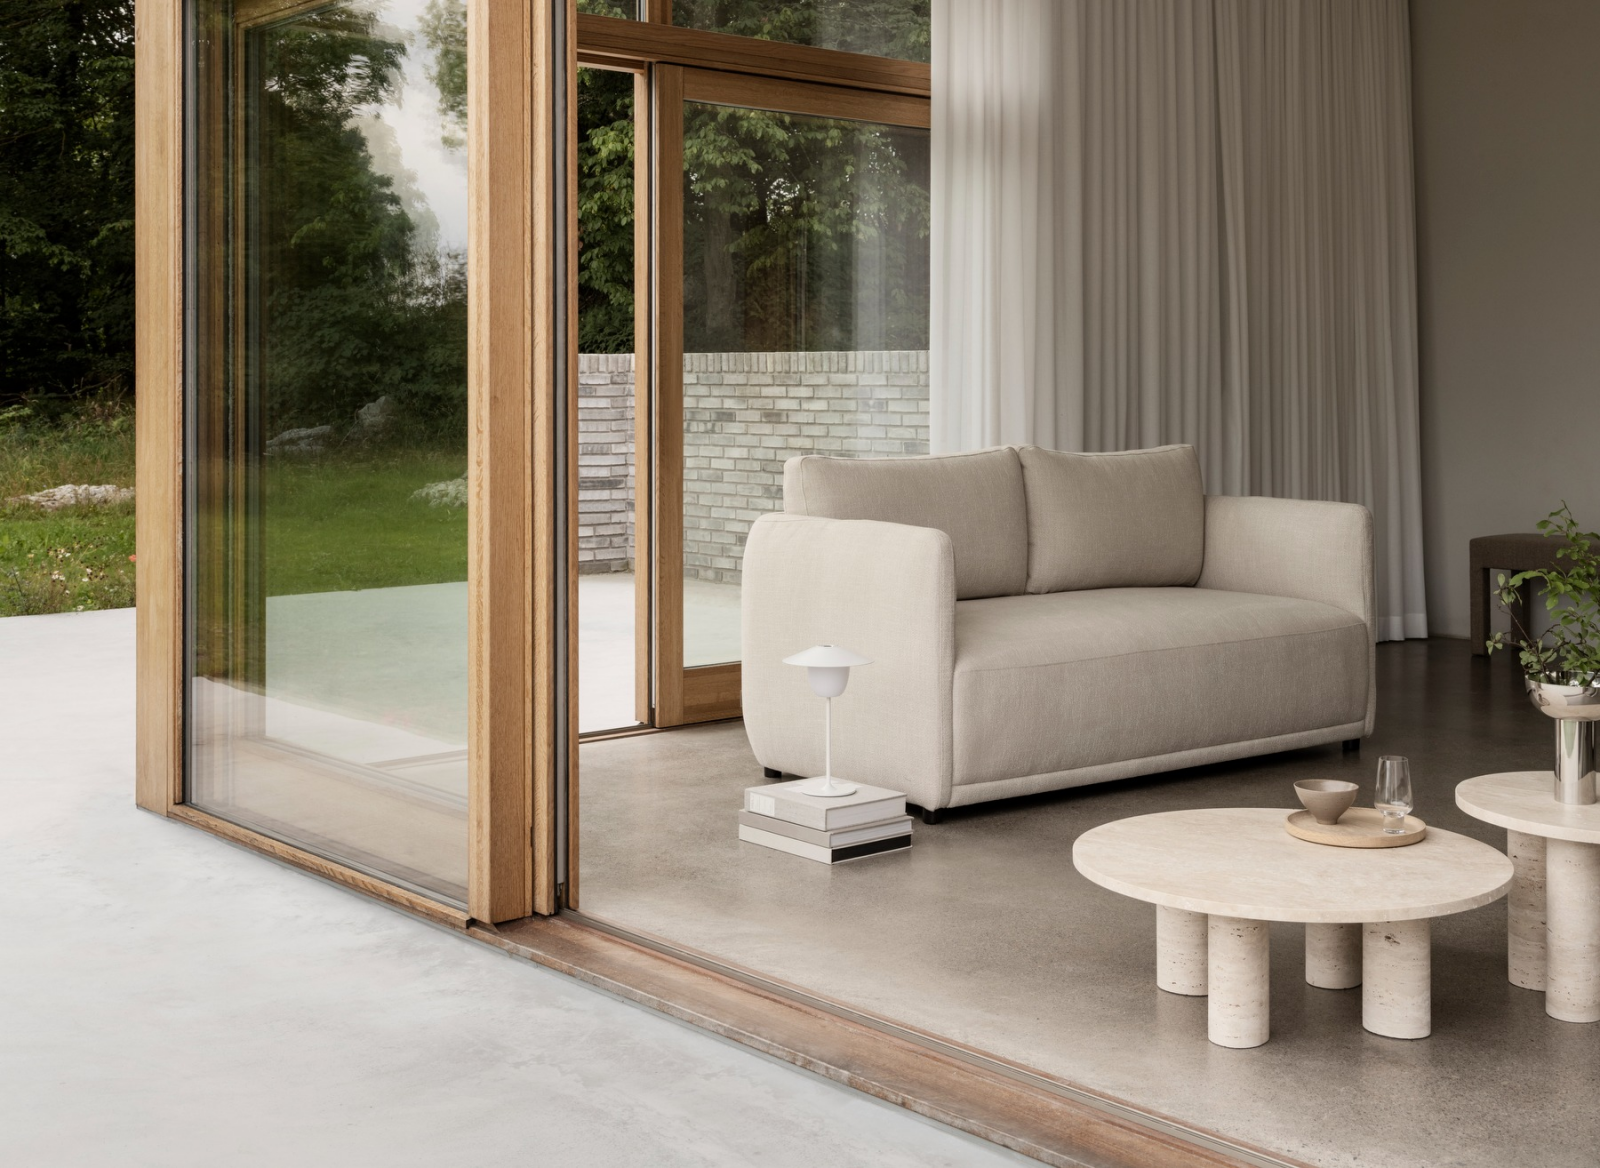 Indoor furniture made by blomus